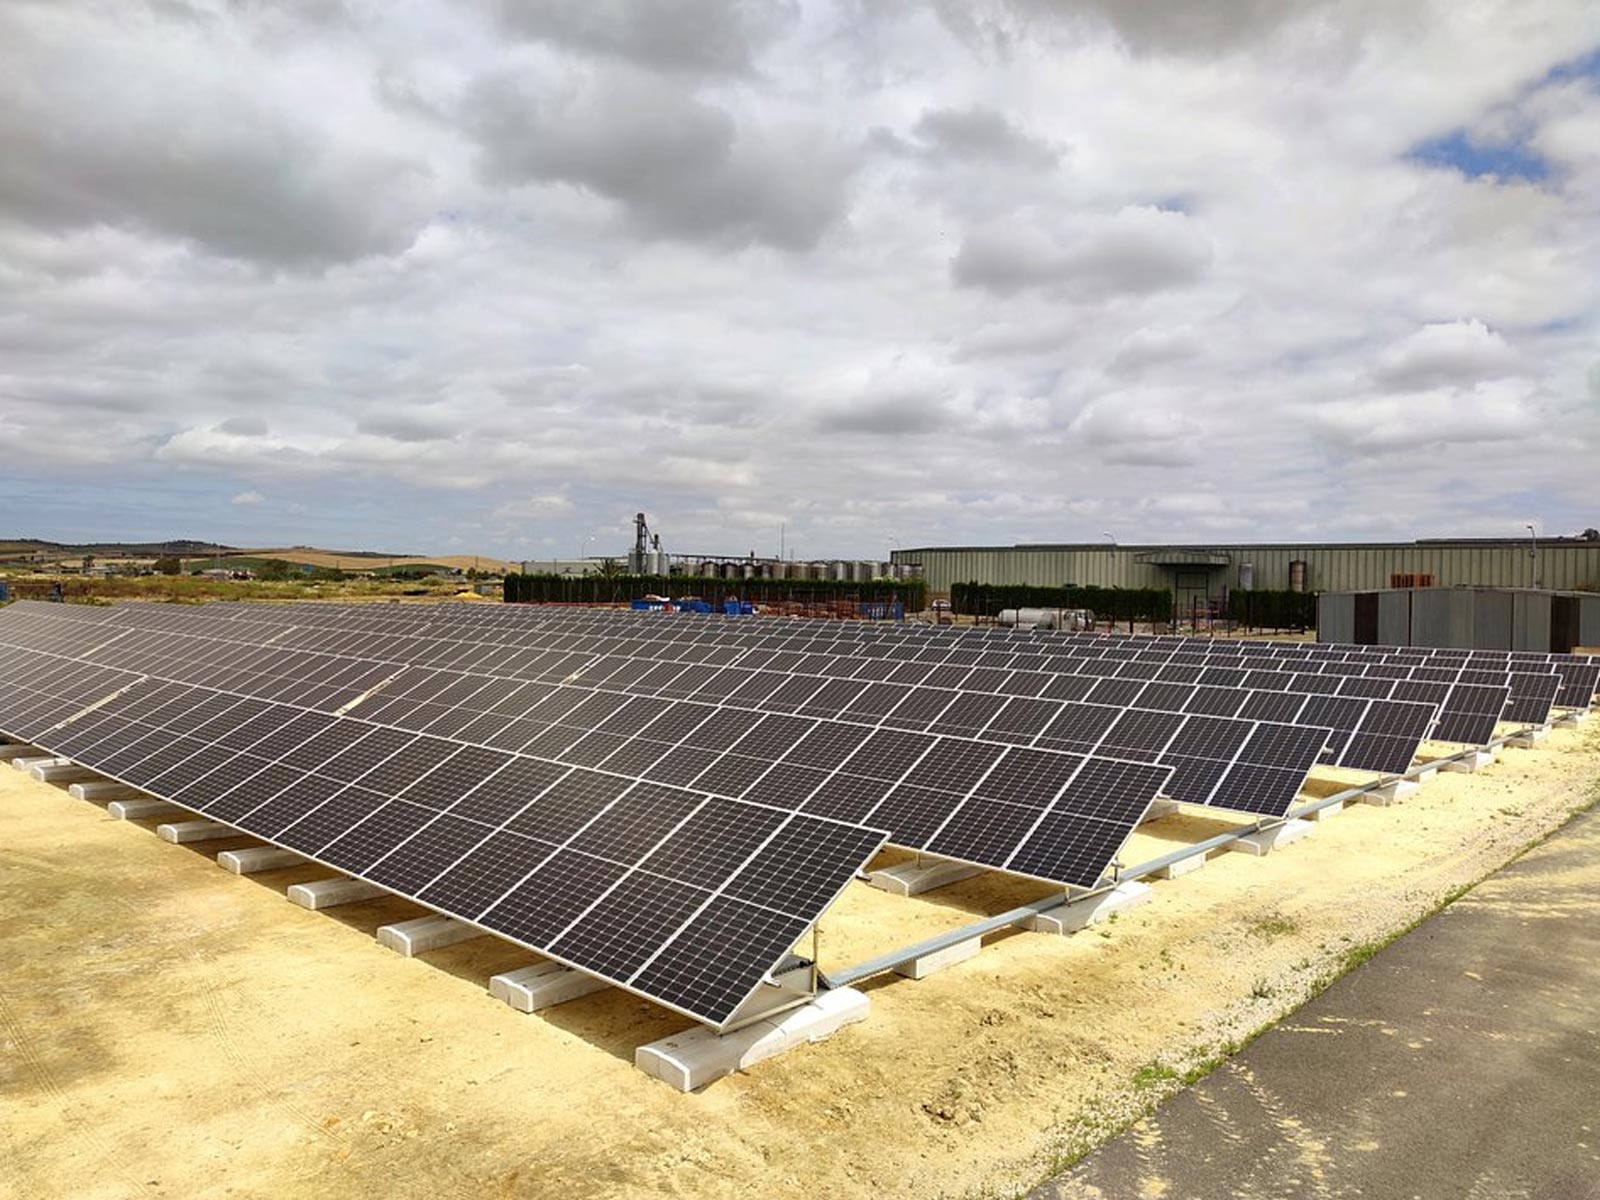 Construction of a photovoltaic installation by Iberdrola Smart Solar